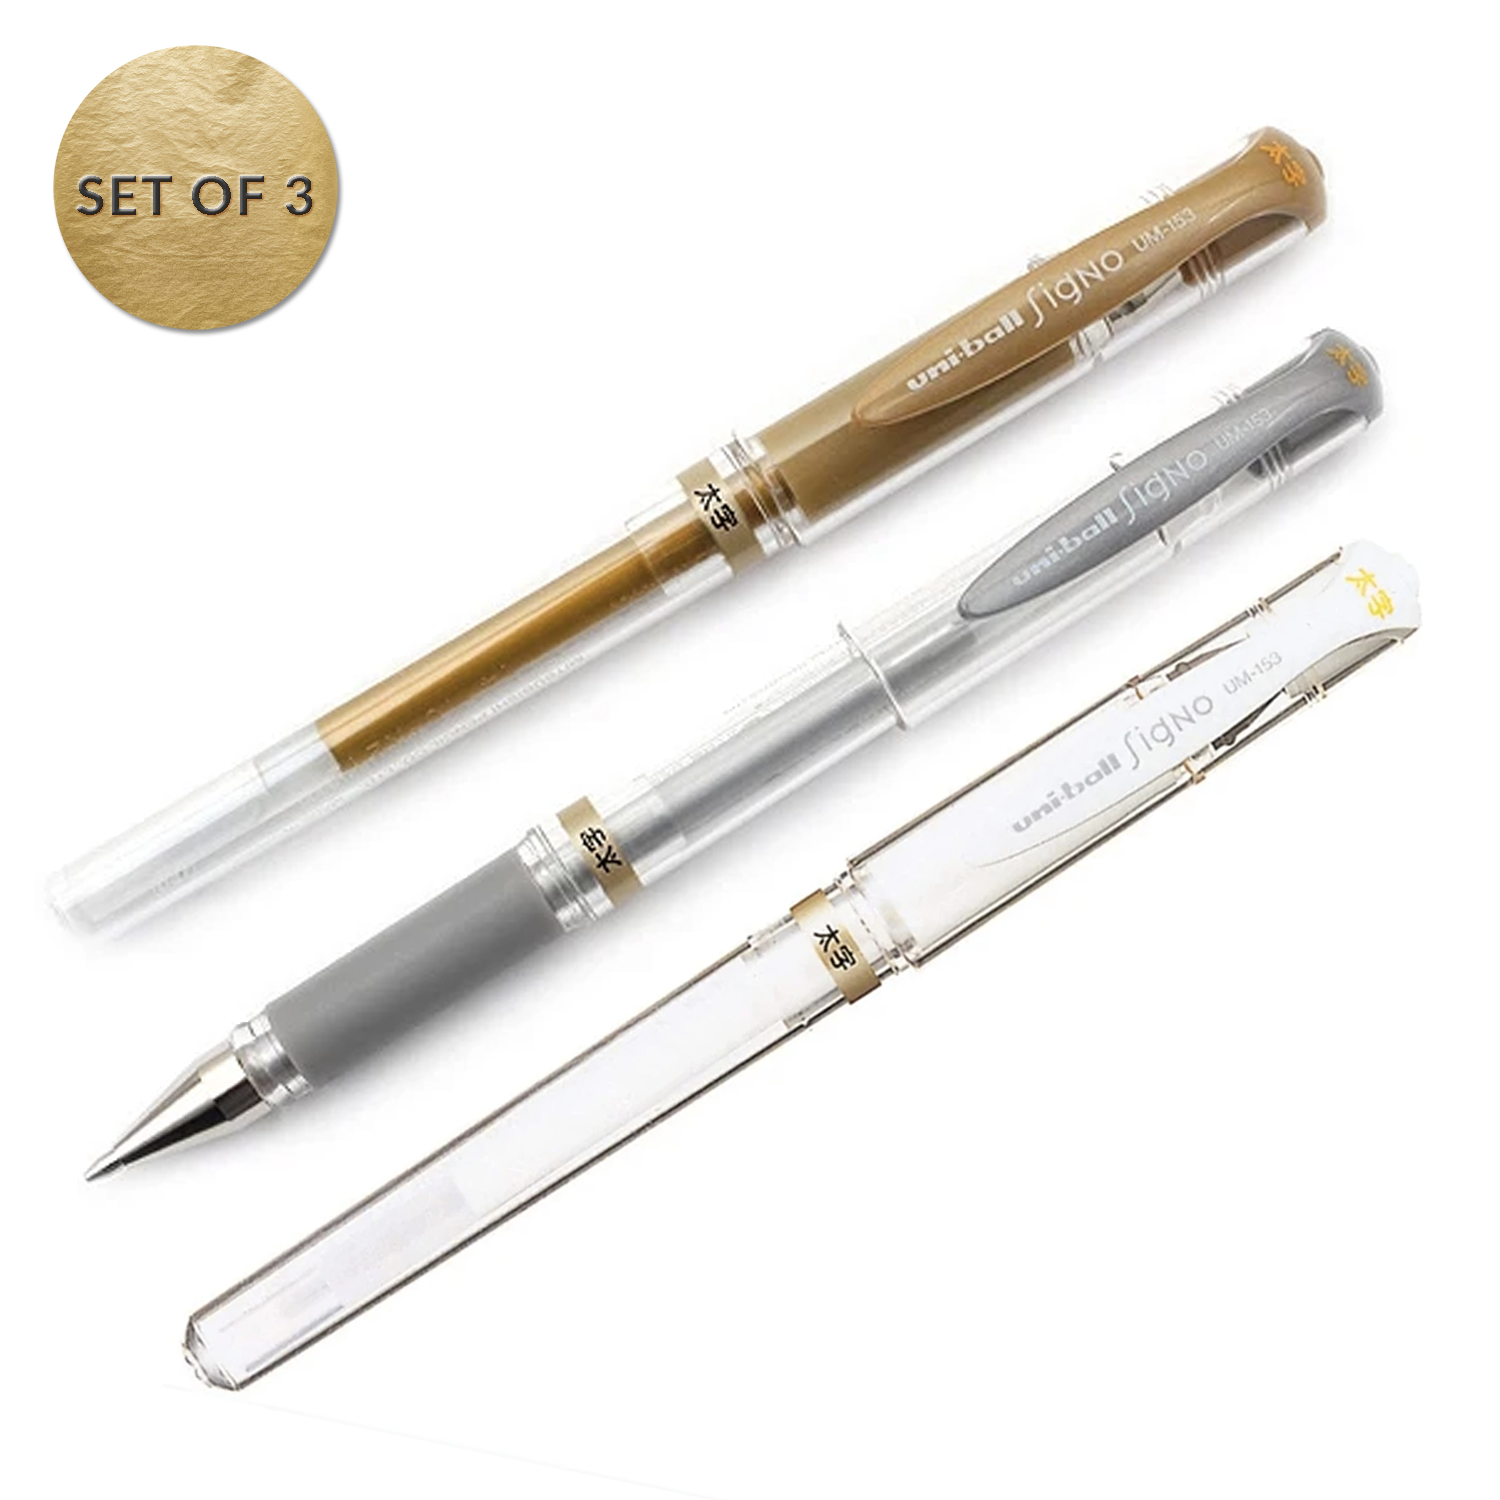 SET OF 3: UNI-BALL SIGNO BROAD UM-153 GEL PEN ASSORTED METALLIC INK GOLD, SILVER, and WHITE